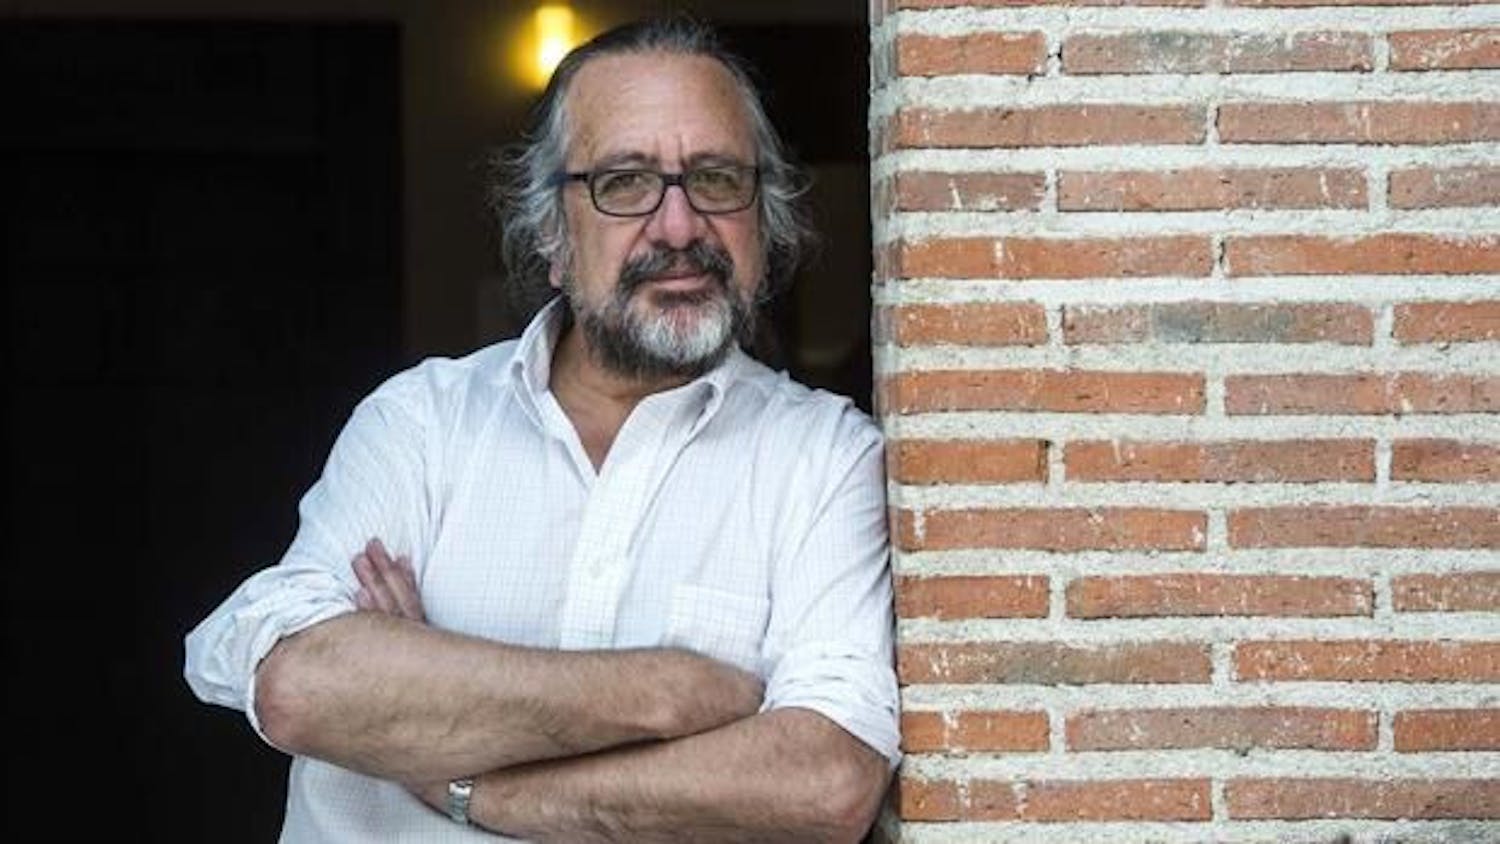 Carlos de la Torre is the new director for the Center for Latin American Studies at UF. He will be the first Latin American-born director the program has ever had.